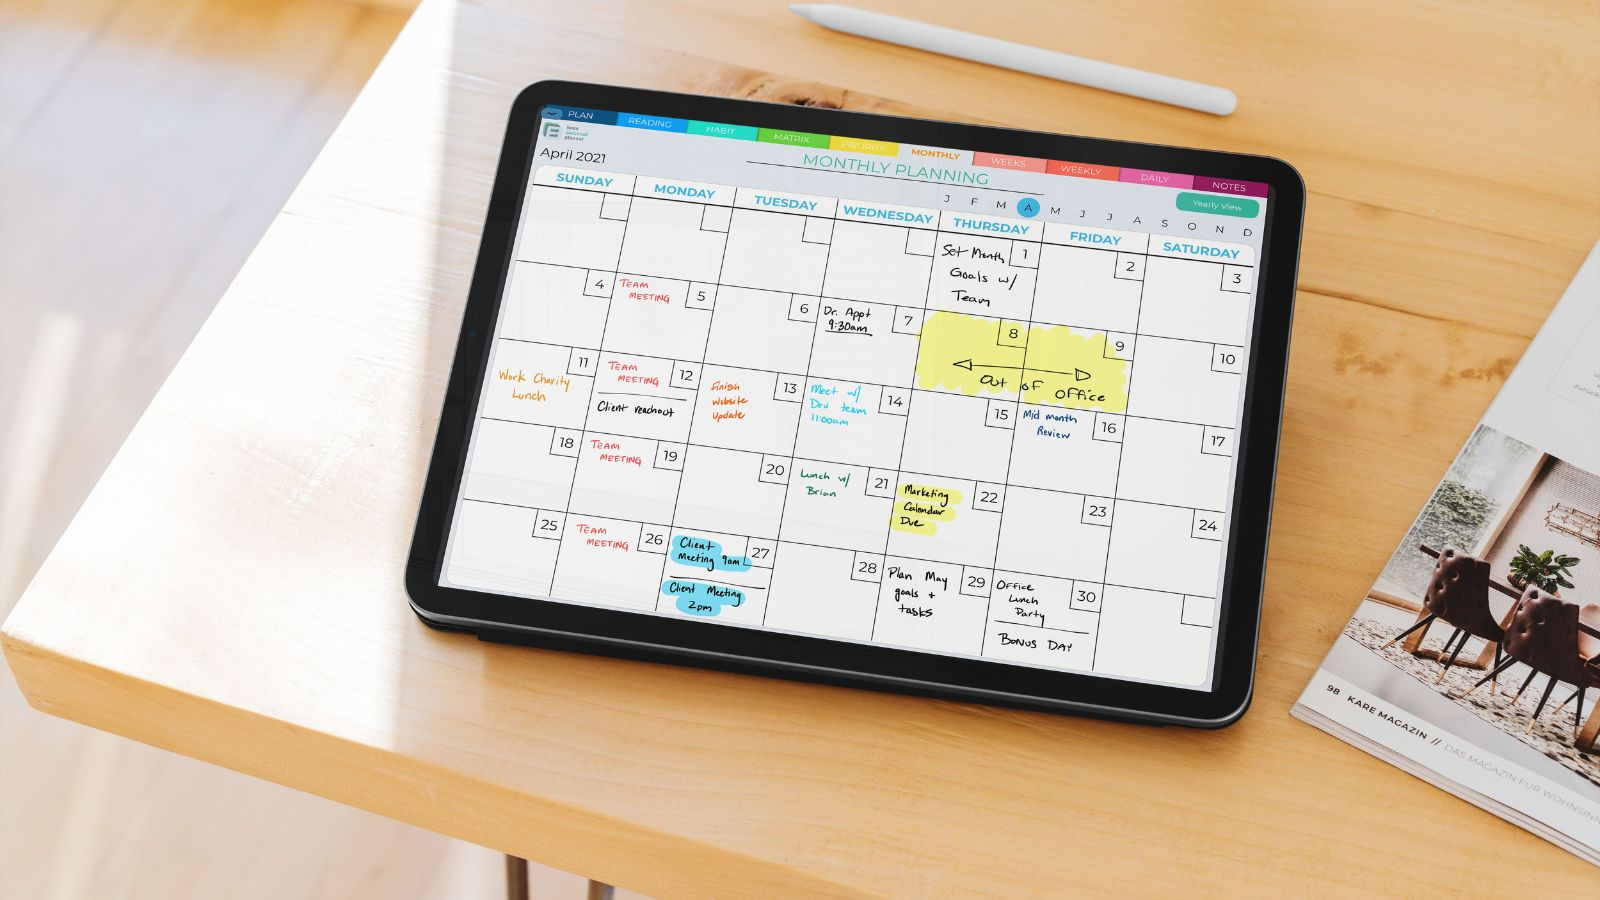 monthly calendar displayed on ipad screen using goodnotes planner app